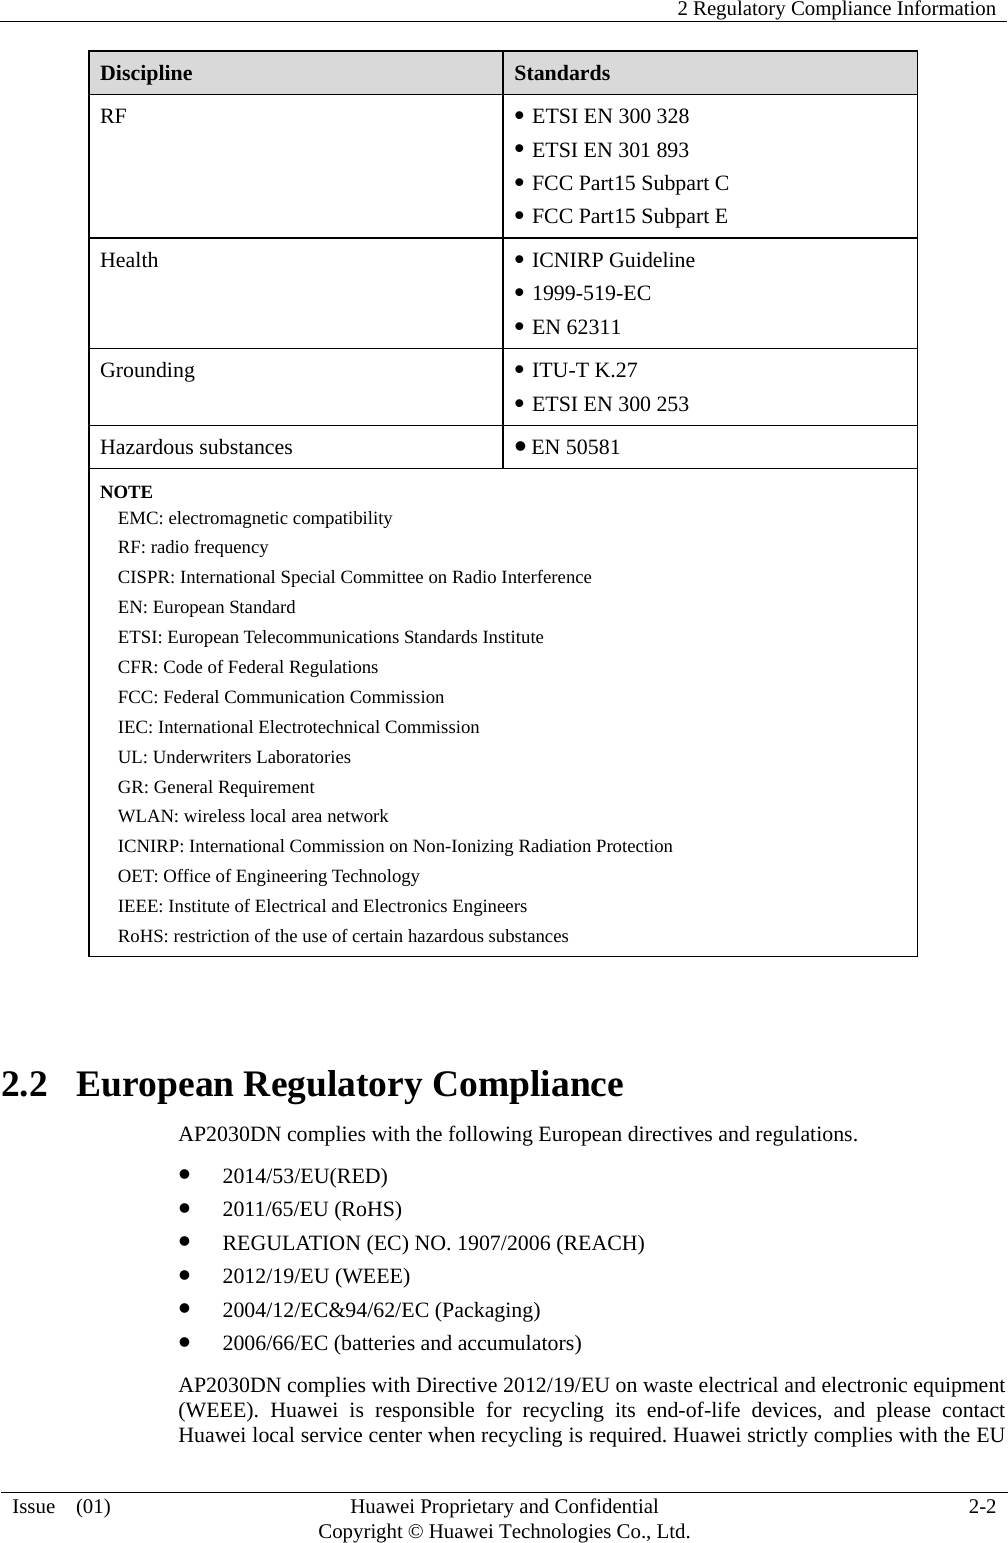    2 Regulatory Compliance Information  Issue  (01)  Huawei Proprietary and Confidential     Copyright © Huawei Technologies Co., Ltd. 2-2 Discipline  Standards RF  z ETSI EN 300 328   z ETSI EN 301 893 z FCC Part15 Subpart C z FCC Part15 Subpart E Health  z ICNIRP Guideline z 1999-519-EC z EN 62311 Grounding  z ITU-T K.27 z ETSI EN 300 253 Hazardous substances  z EN 50581 NOTE EMC: electromagnetic compatibility RF: radio frequency CISPR: International Special Committee on Radio Interference EN: European Standard ETSI: European Telecommunications Standards Institute CFR: Code of Federal Regulations FCC: Federal Communication Commission IEC: International Electrotechnical Commission UL: Underwriters Laboratories GR: General Requirement WLAN: wireless local area network ICNIRP: International Commission on Non-Ionizing Radiation Protection OET: Office of Engineering Technology IEEE: Institute of Electrical and Electronics Engineers RoHS: restriction of the use of certain hazardous substances  2.2   European Regulatory Compliance AP2030DN complies with the following European directives and regulations. z 2014/53/EU(RED) z 2011/65/EU (RoHS) z REGULATION (EC) NO. 1907/2006 (REACH) z 2012/19/EU (WEEE) z 2004/12/EC&amp;94/62/EC (Packaging) z 2006/66/EC (batteries and accumulators) AP2030DN complies with Directive 2012/19/EU on waste electrical and electronic equipment (WEEE). Huawei is responsible for recycling its end-of-life devices, and please contact Huawei local service center when recycling is required. Huawei strictly complies with the EU 